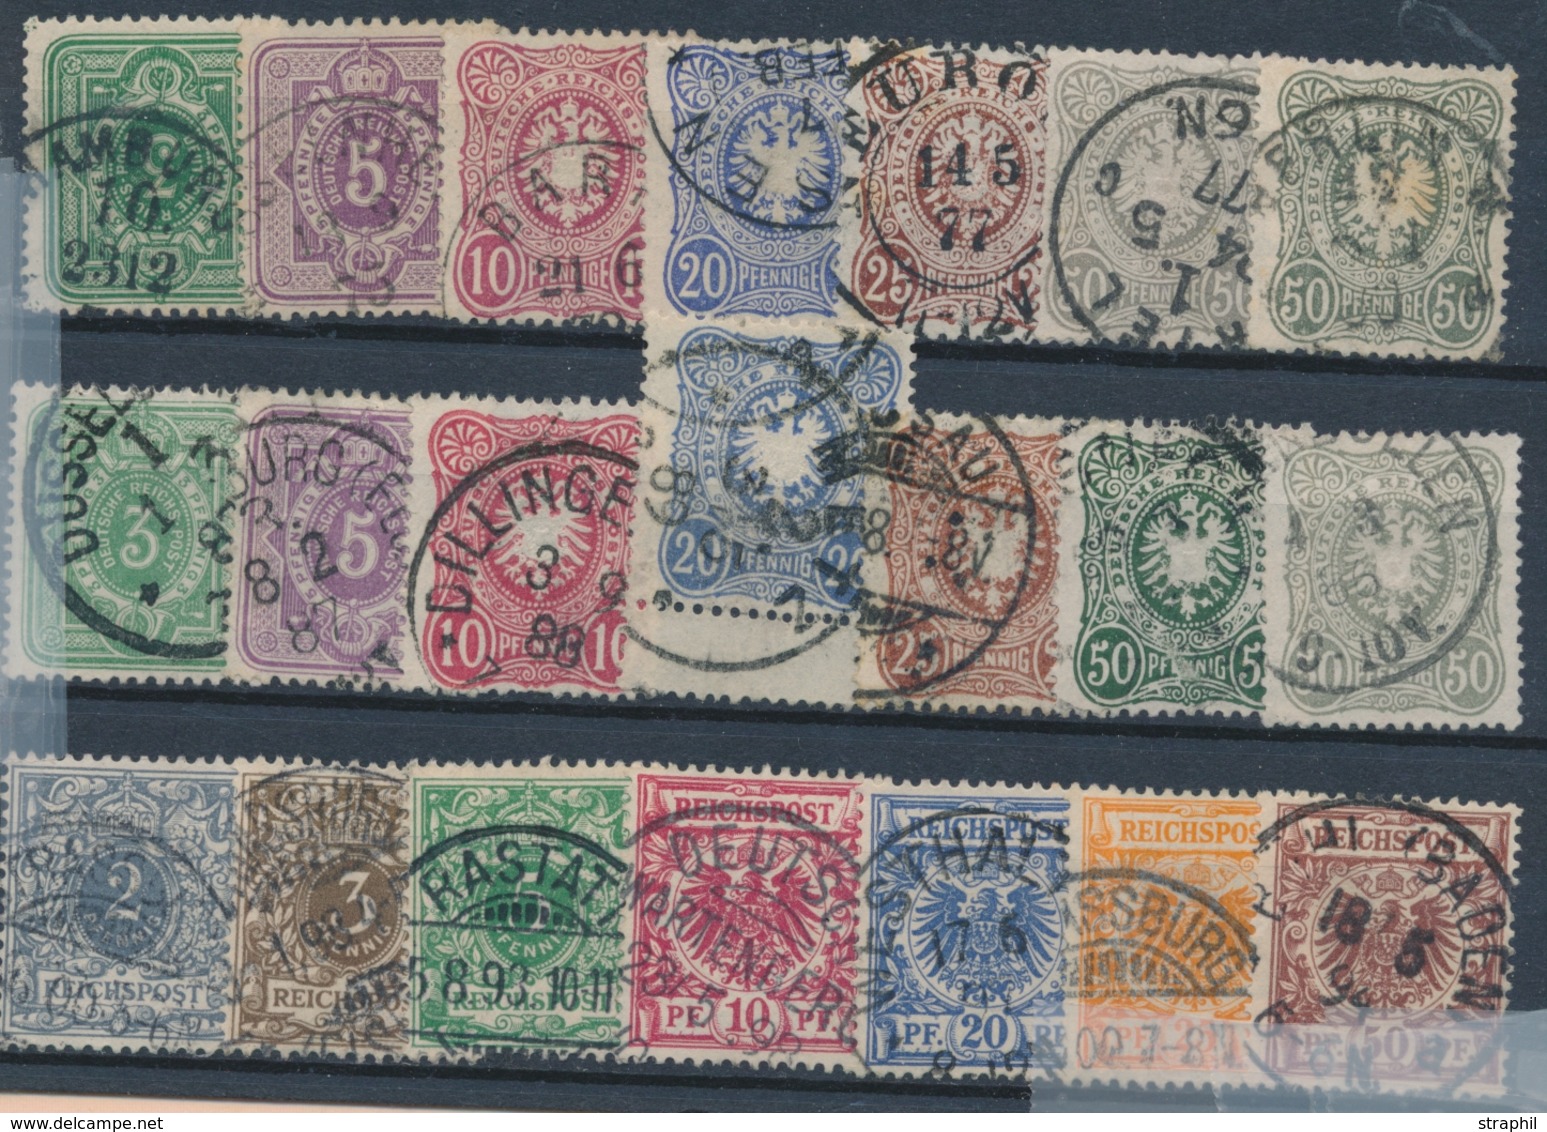 O ALLEMAGNE - EMPIRE  - O - N°30/41a + 44/50 - Plup. Belles Oblit. - Ensemble TB - Used Stamps